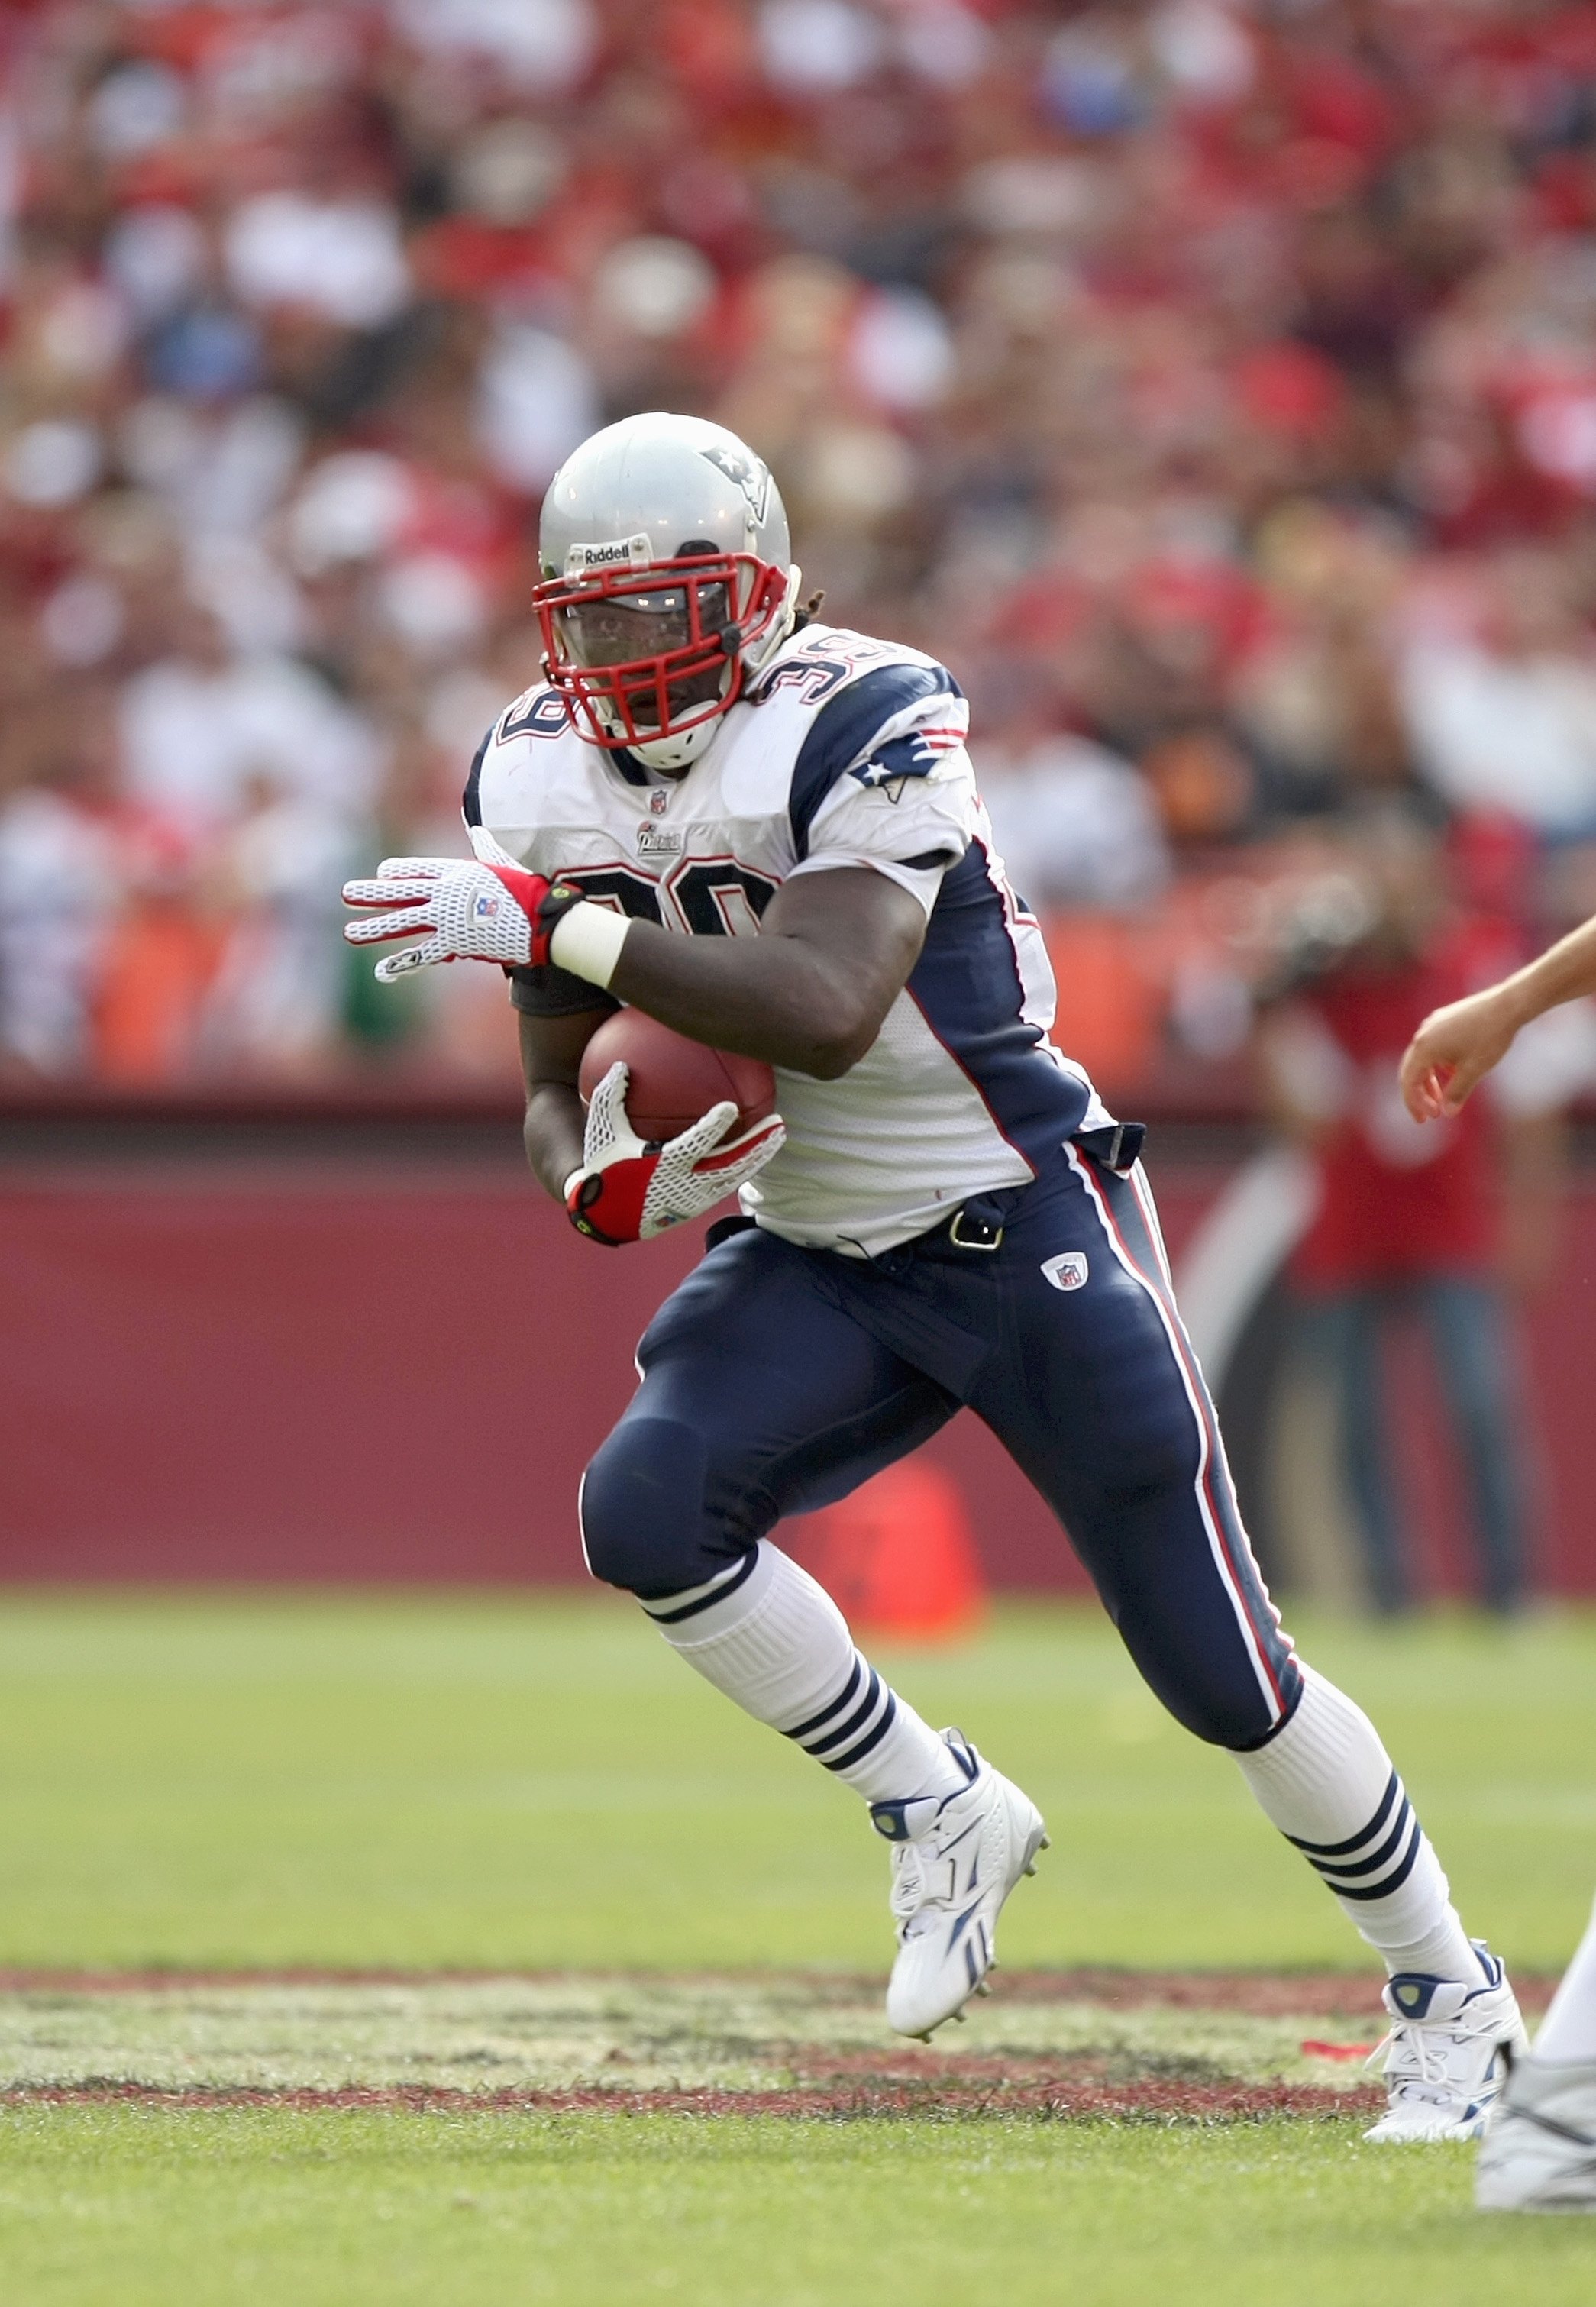 SAN FRANCISCO - OCTOBER 5:  Laurence Maroney #39 of the New England Patriots carries the ball during the game against the San Francisco 49ers on October 5, 2008 at Candlestick Park in San Francisco, California. (Photo by Jed Jacobsohn/Getty Images)